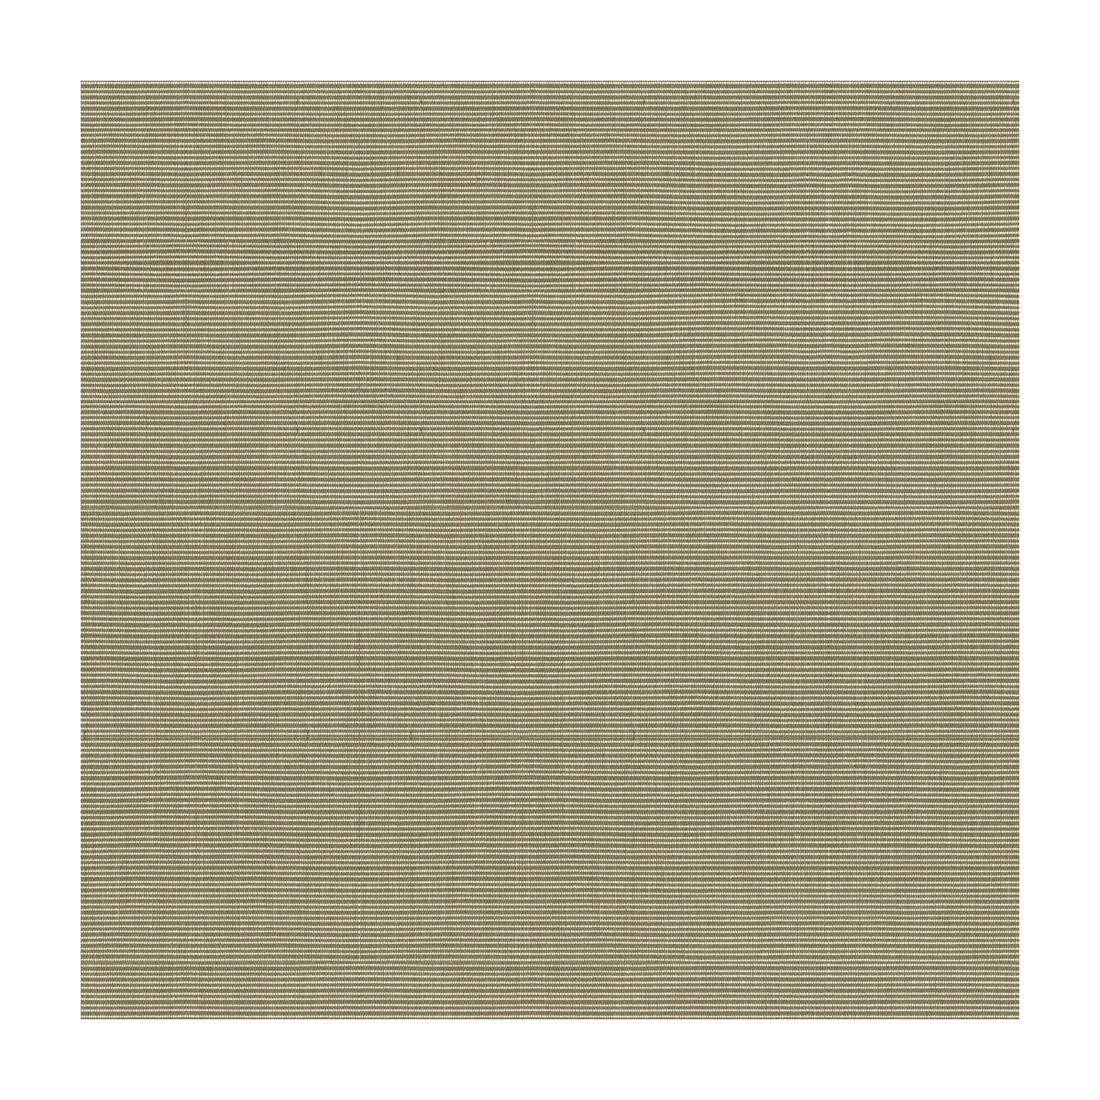 Aport fabric in coconut color - pattern 33525.11.0 - by Kravet Design in the Waterworks II collection